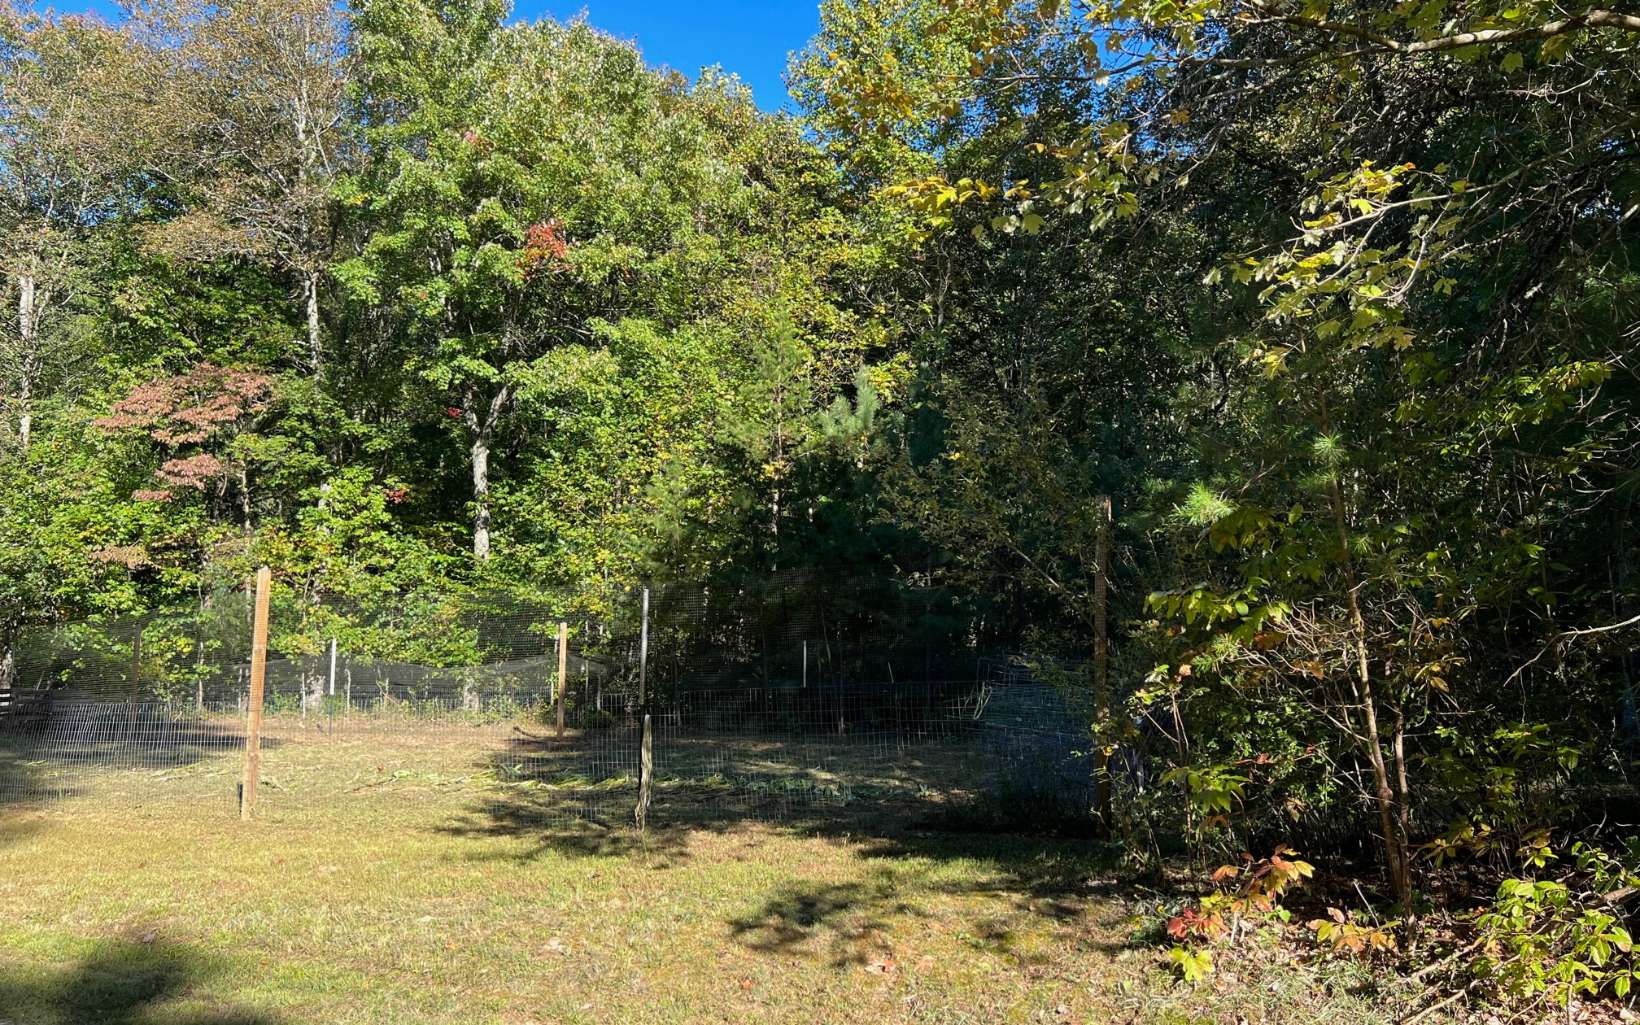 Level laying 1.01 acre lot in desirable neighborhood off of Boardtown Road. This lot has been used as a garden site for many years but zoned residential (R1). No HOA. All paved roads, located 5 miles from the Downtown Ellijay Round-A-Bout. Electric is available, lot will require septic, private well, and home must meet Gilmer County property line setbacks. Mobile homes are restricted. (No perc test has been done on the property)